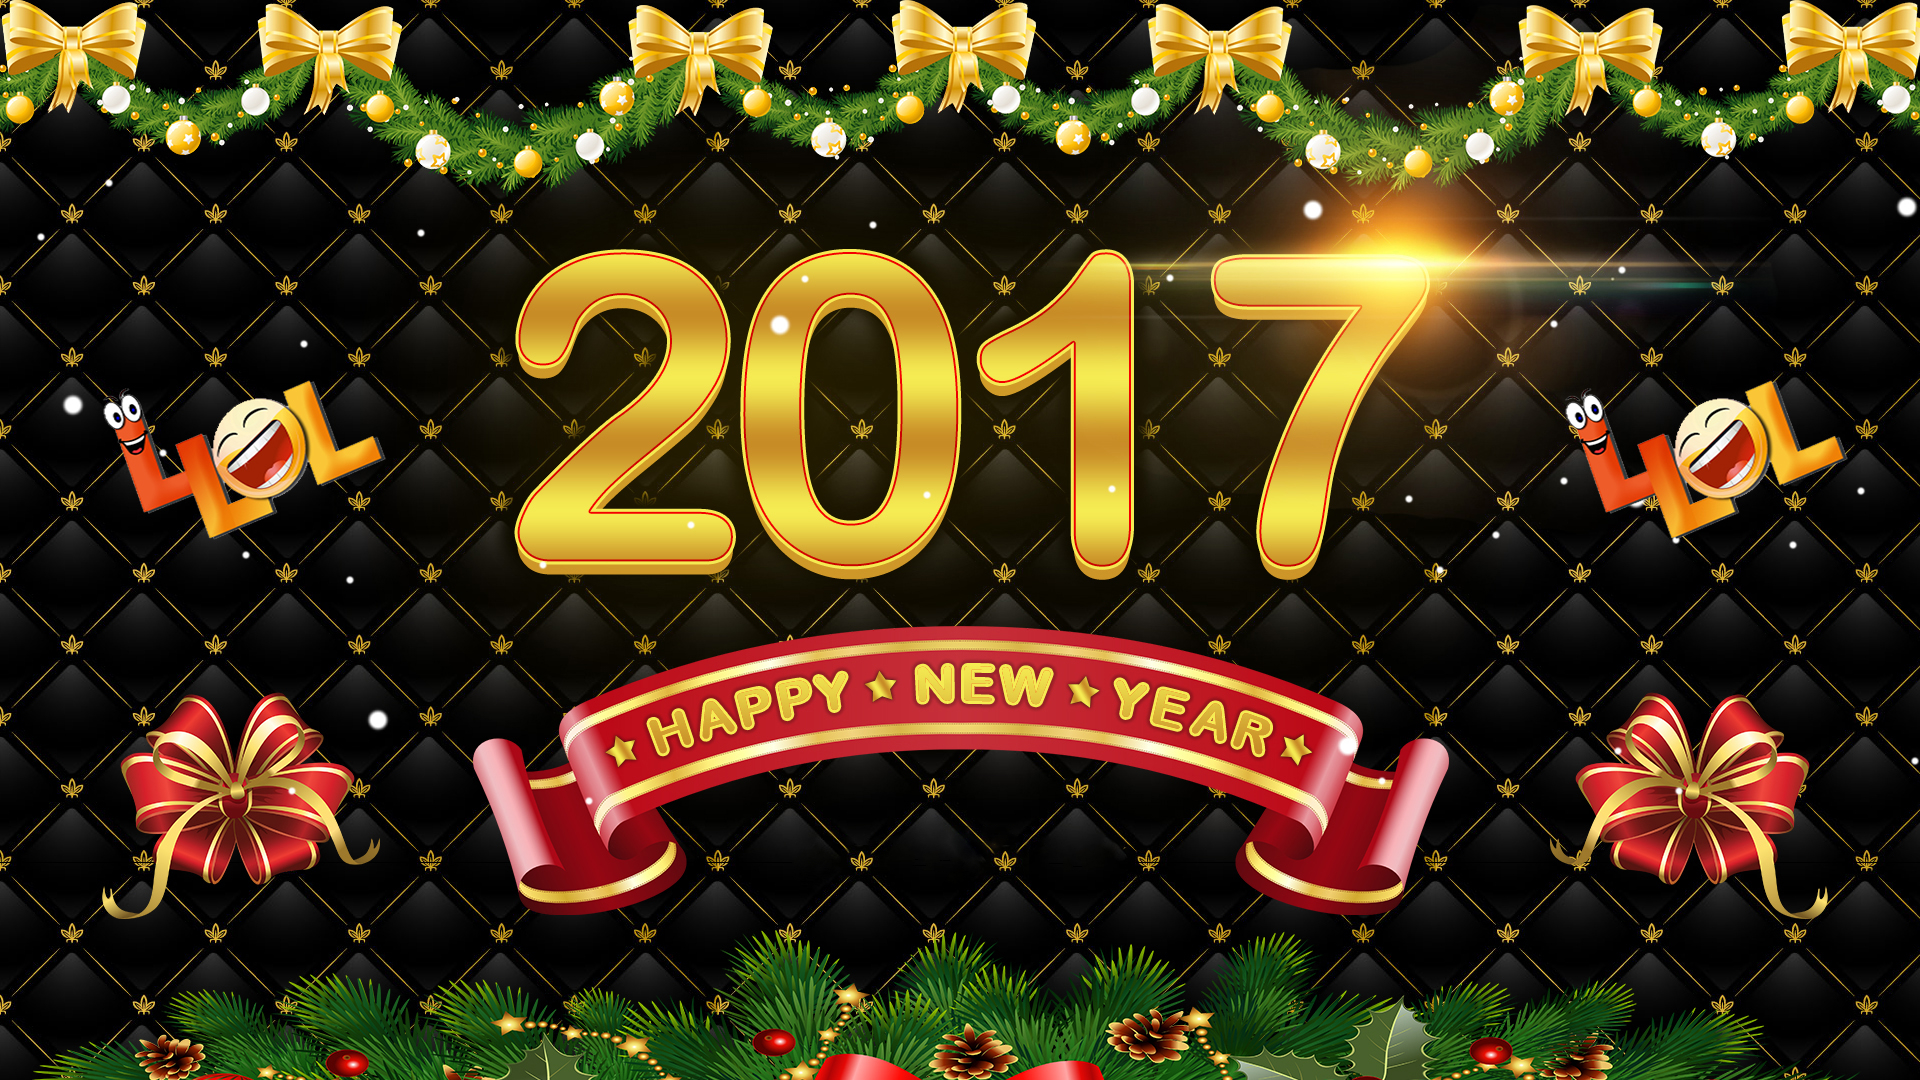 Holiday New Year New Year 2017 1920x1080